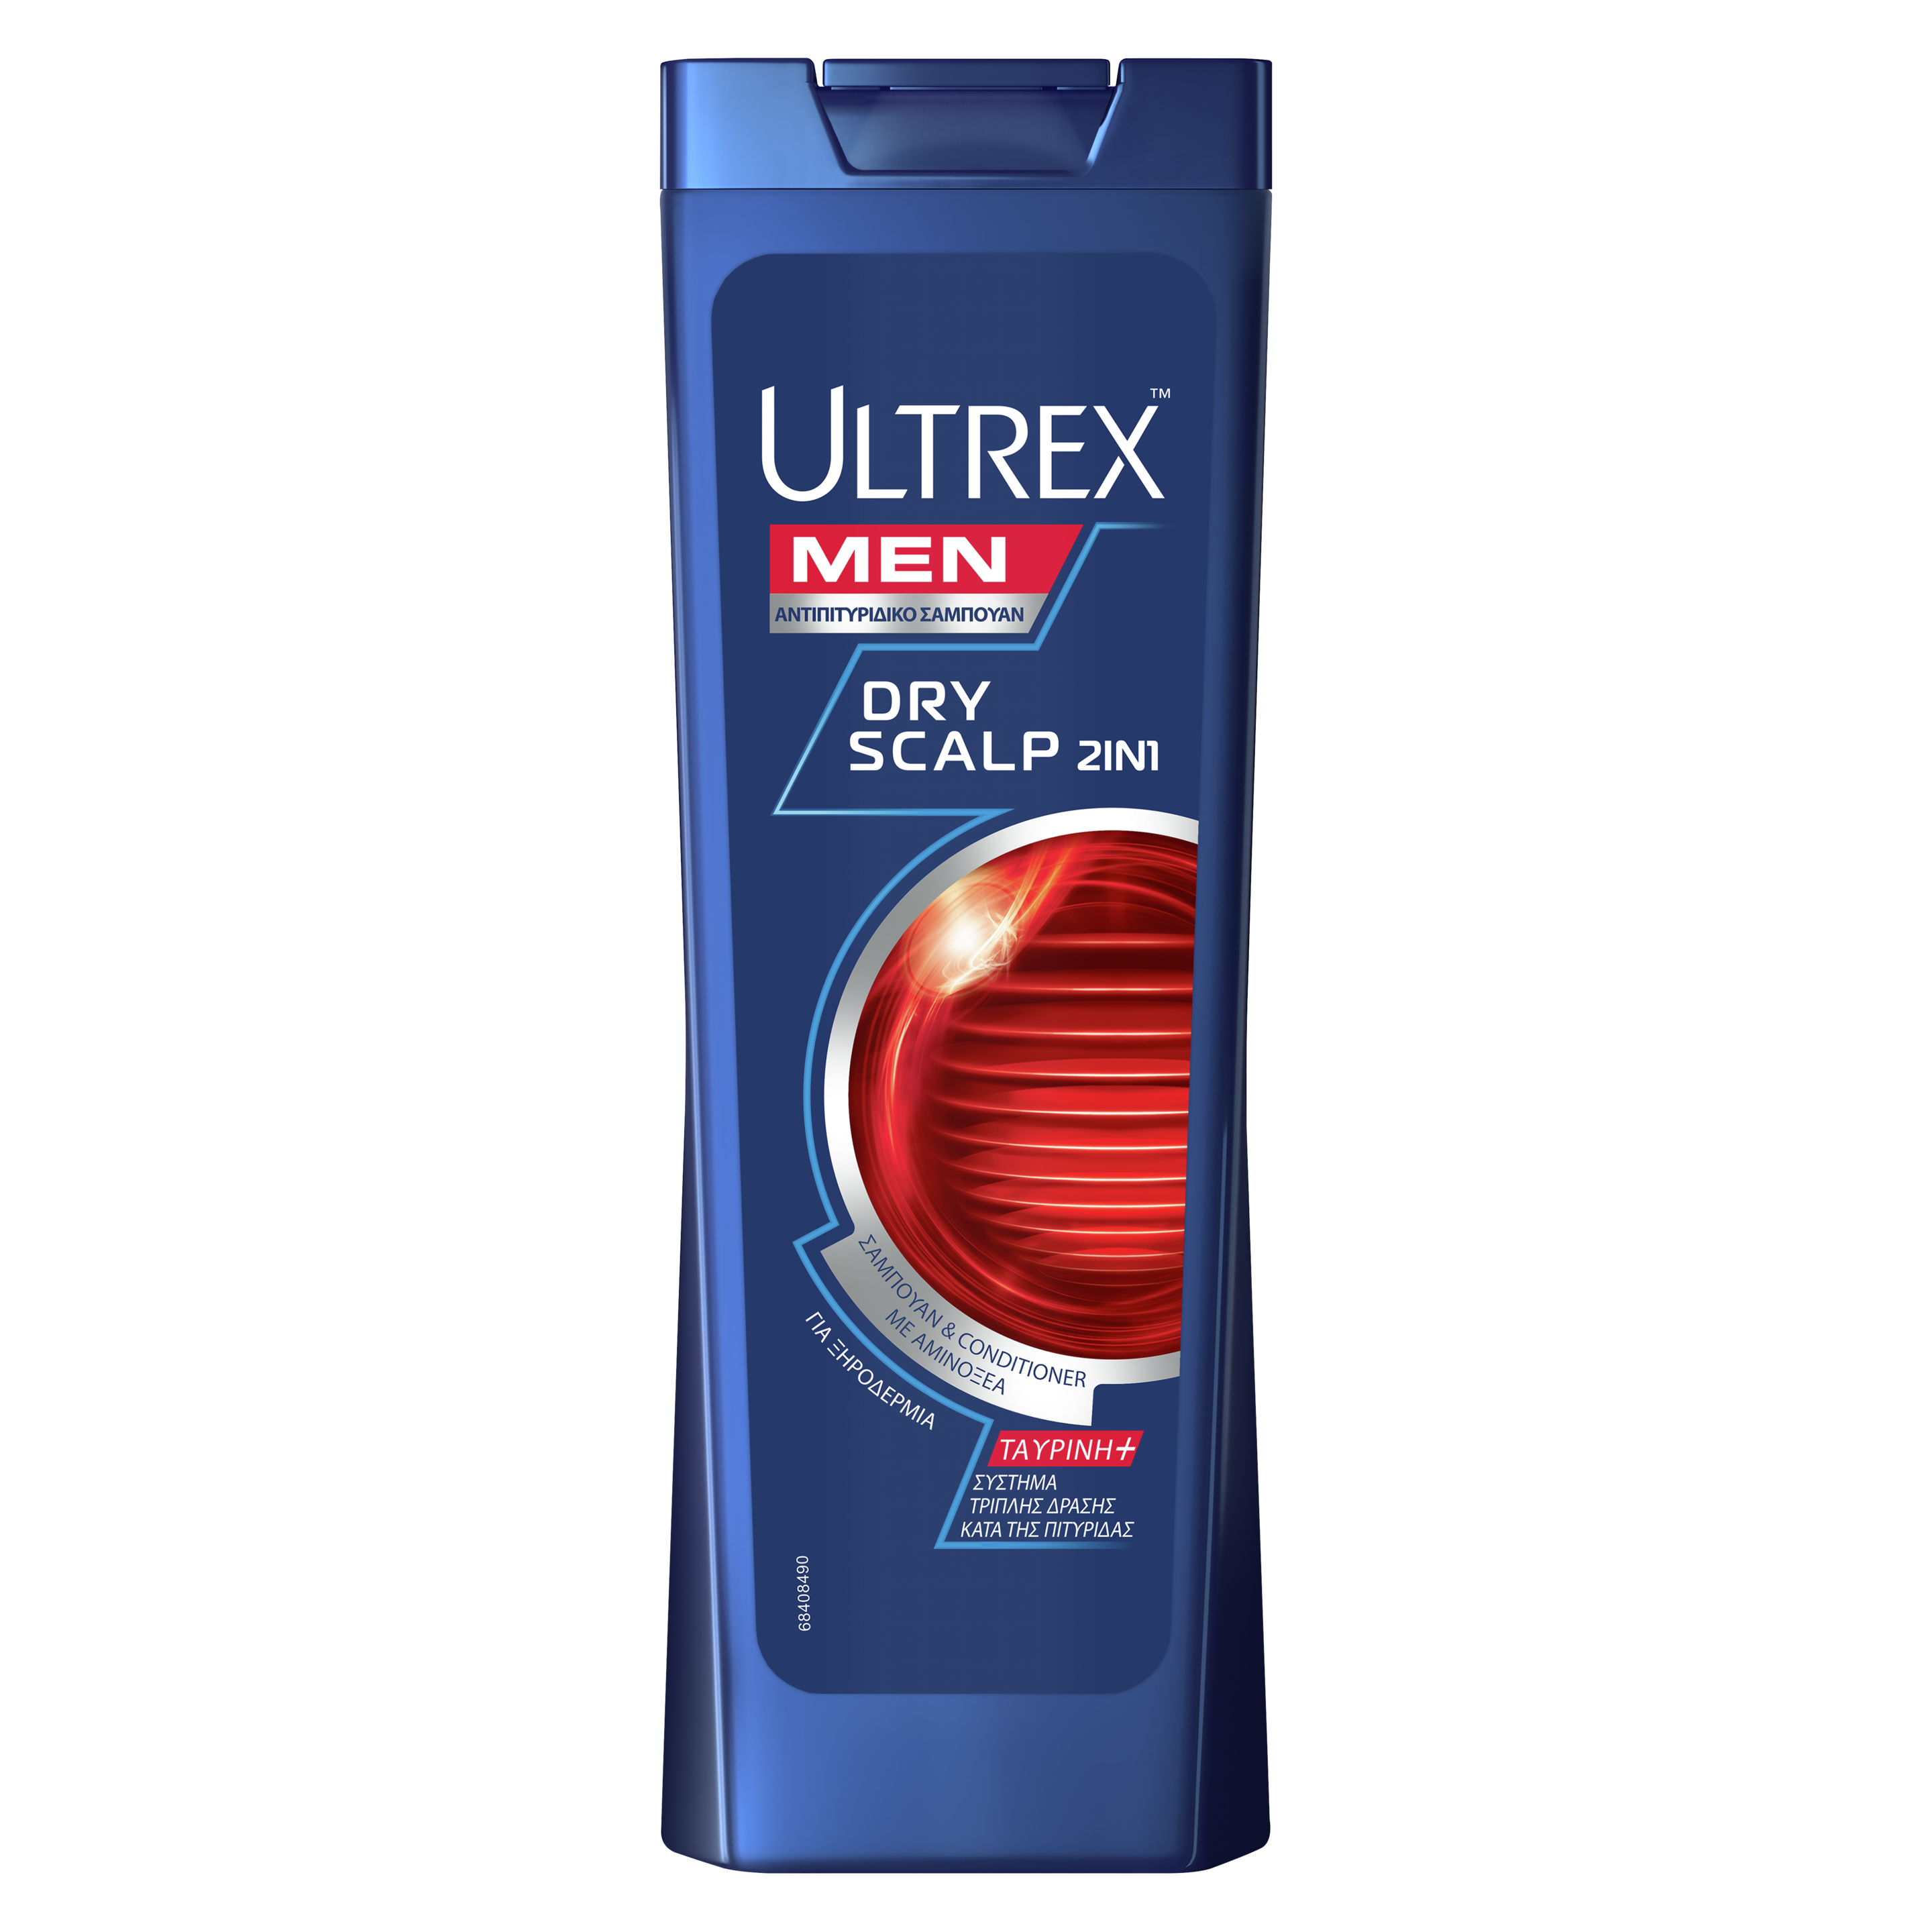 ultrex dry scalp care 2 in 1 Text